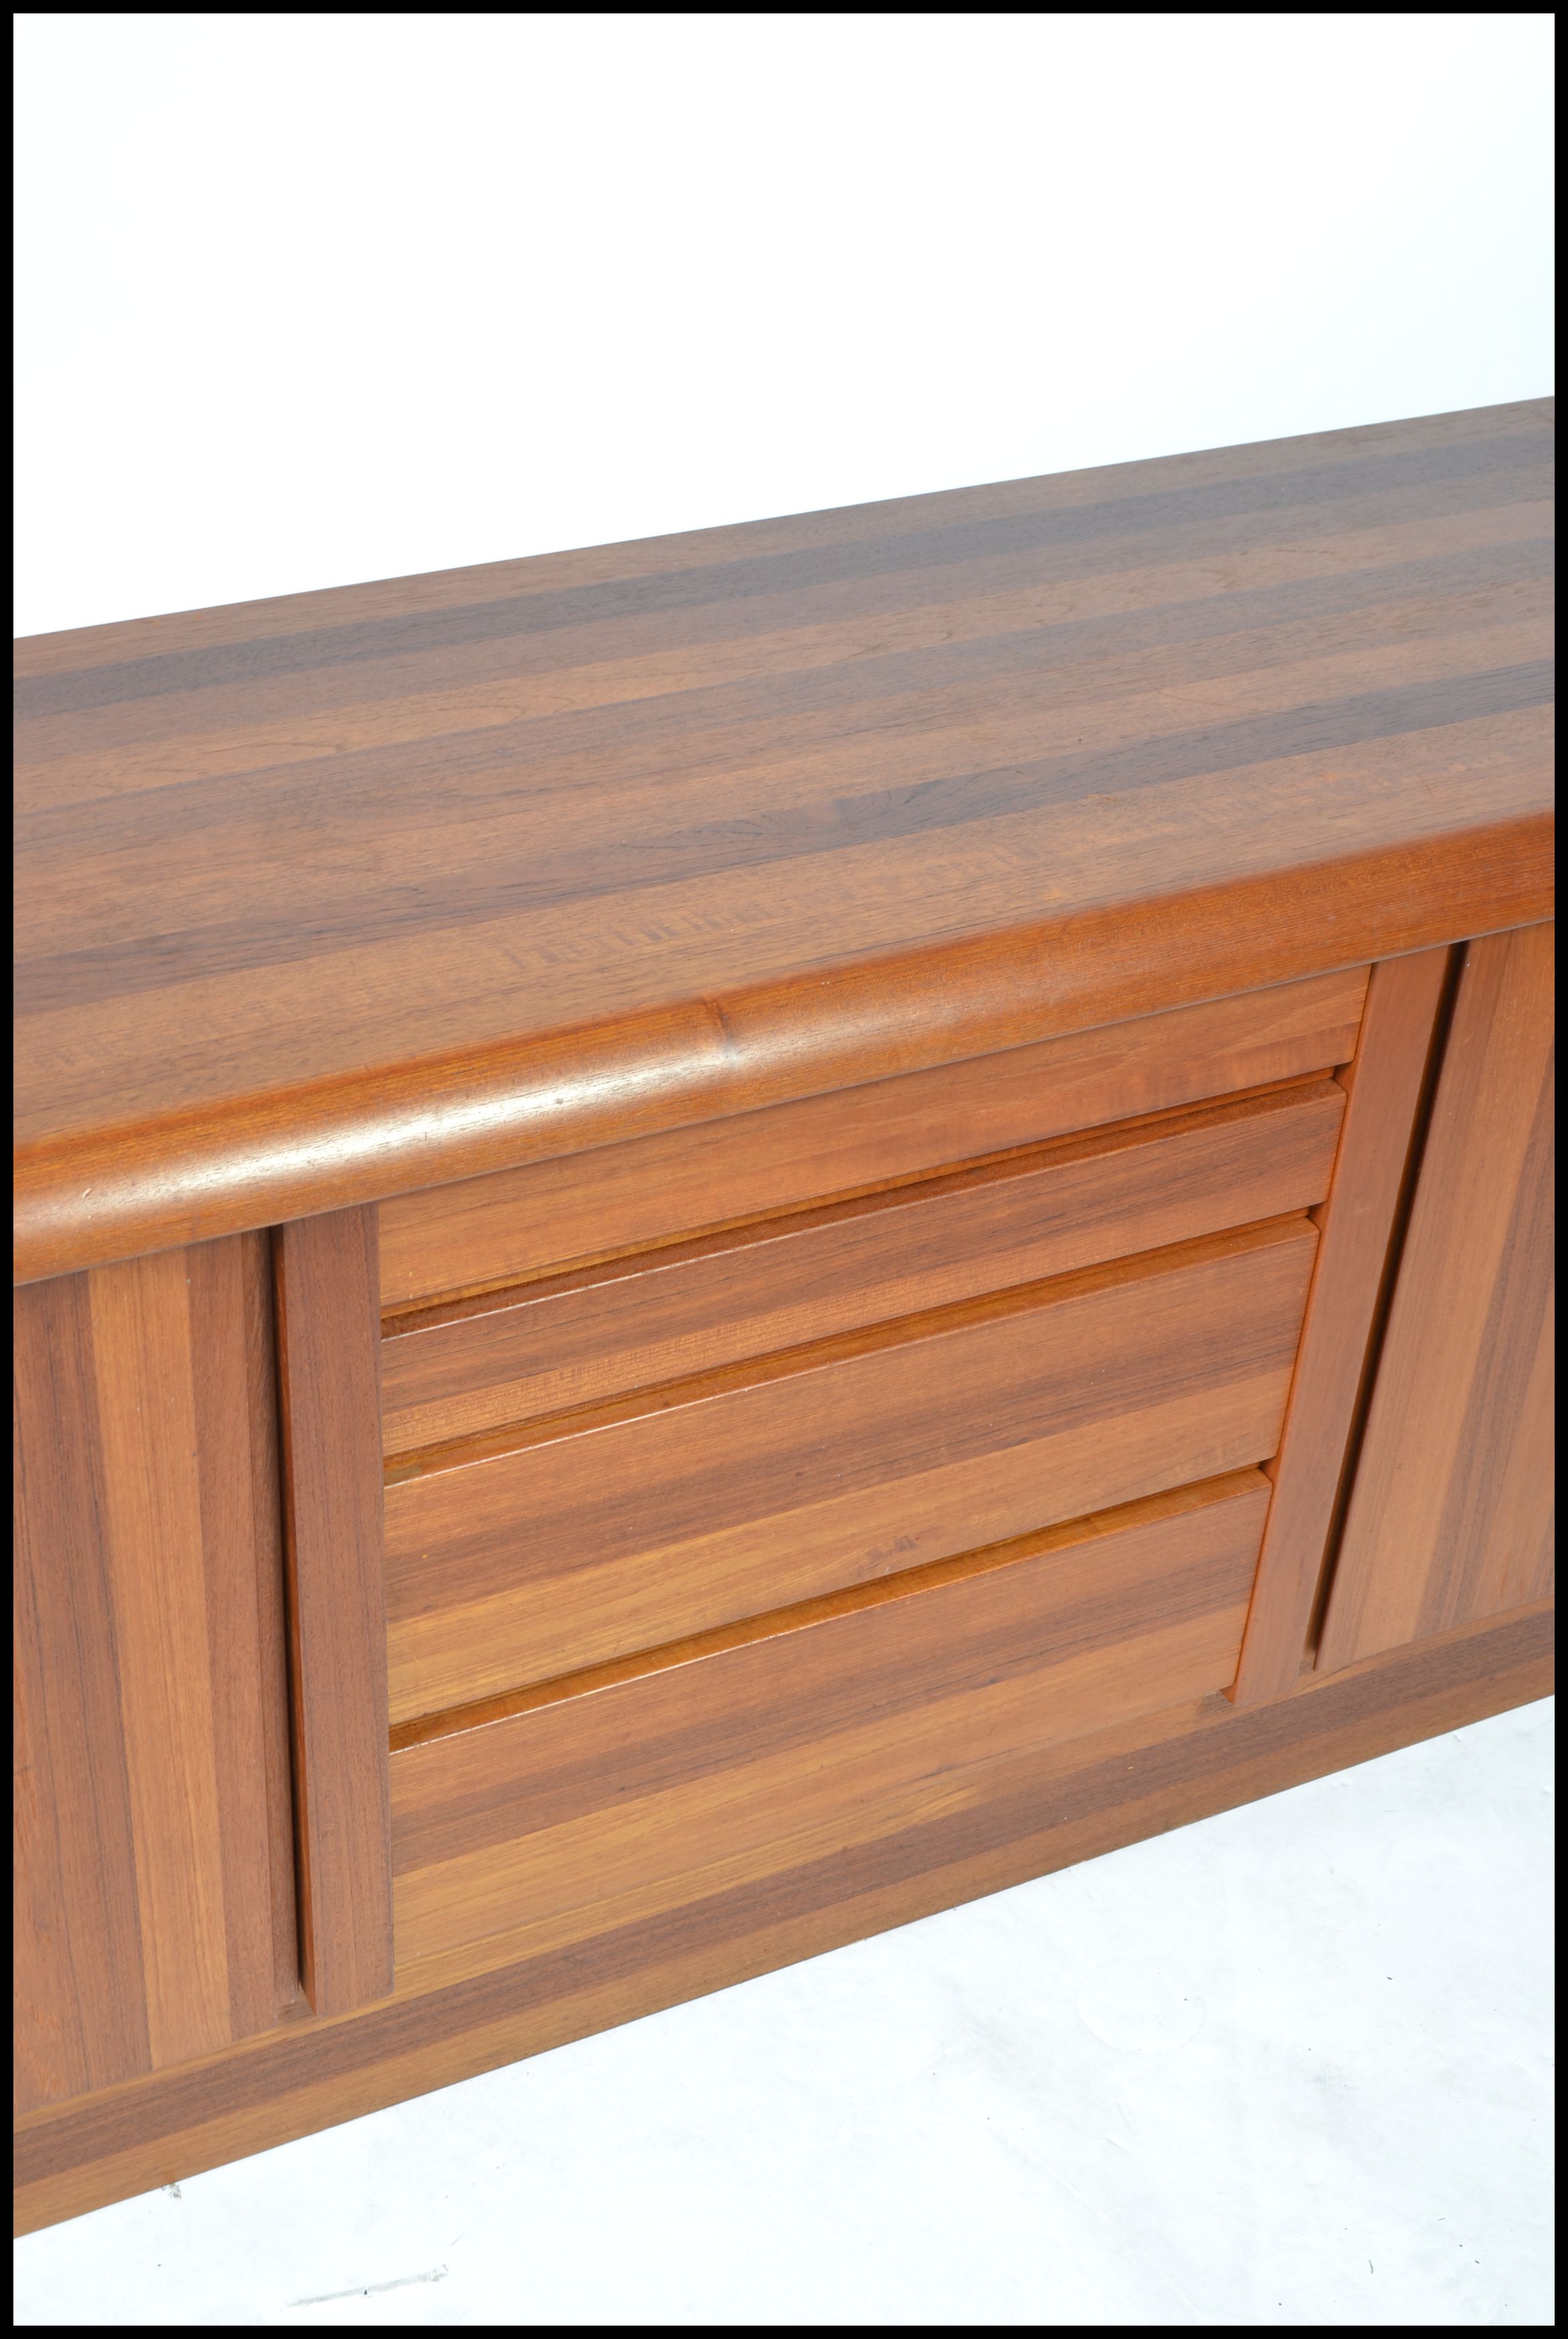 A 20th century Danish sideboard of low form and heavy solid teak construction by Ejvind Johansen - Image 6 of 7